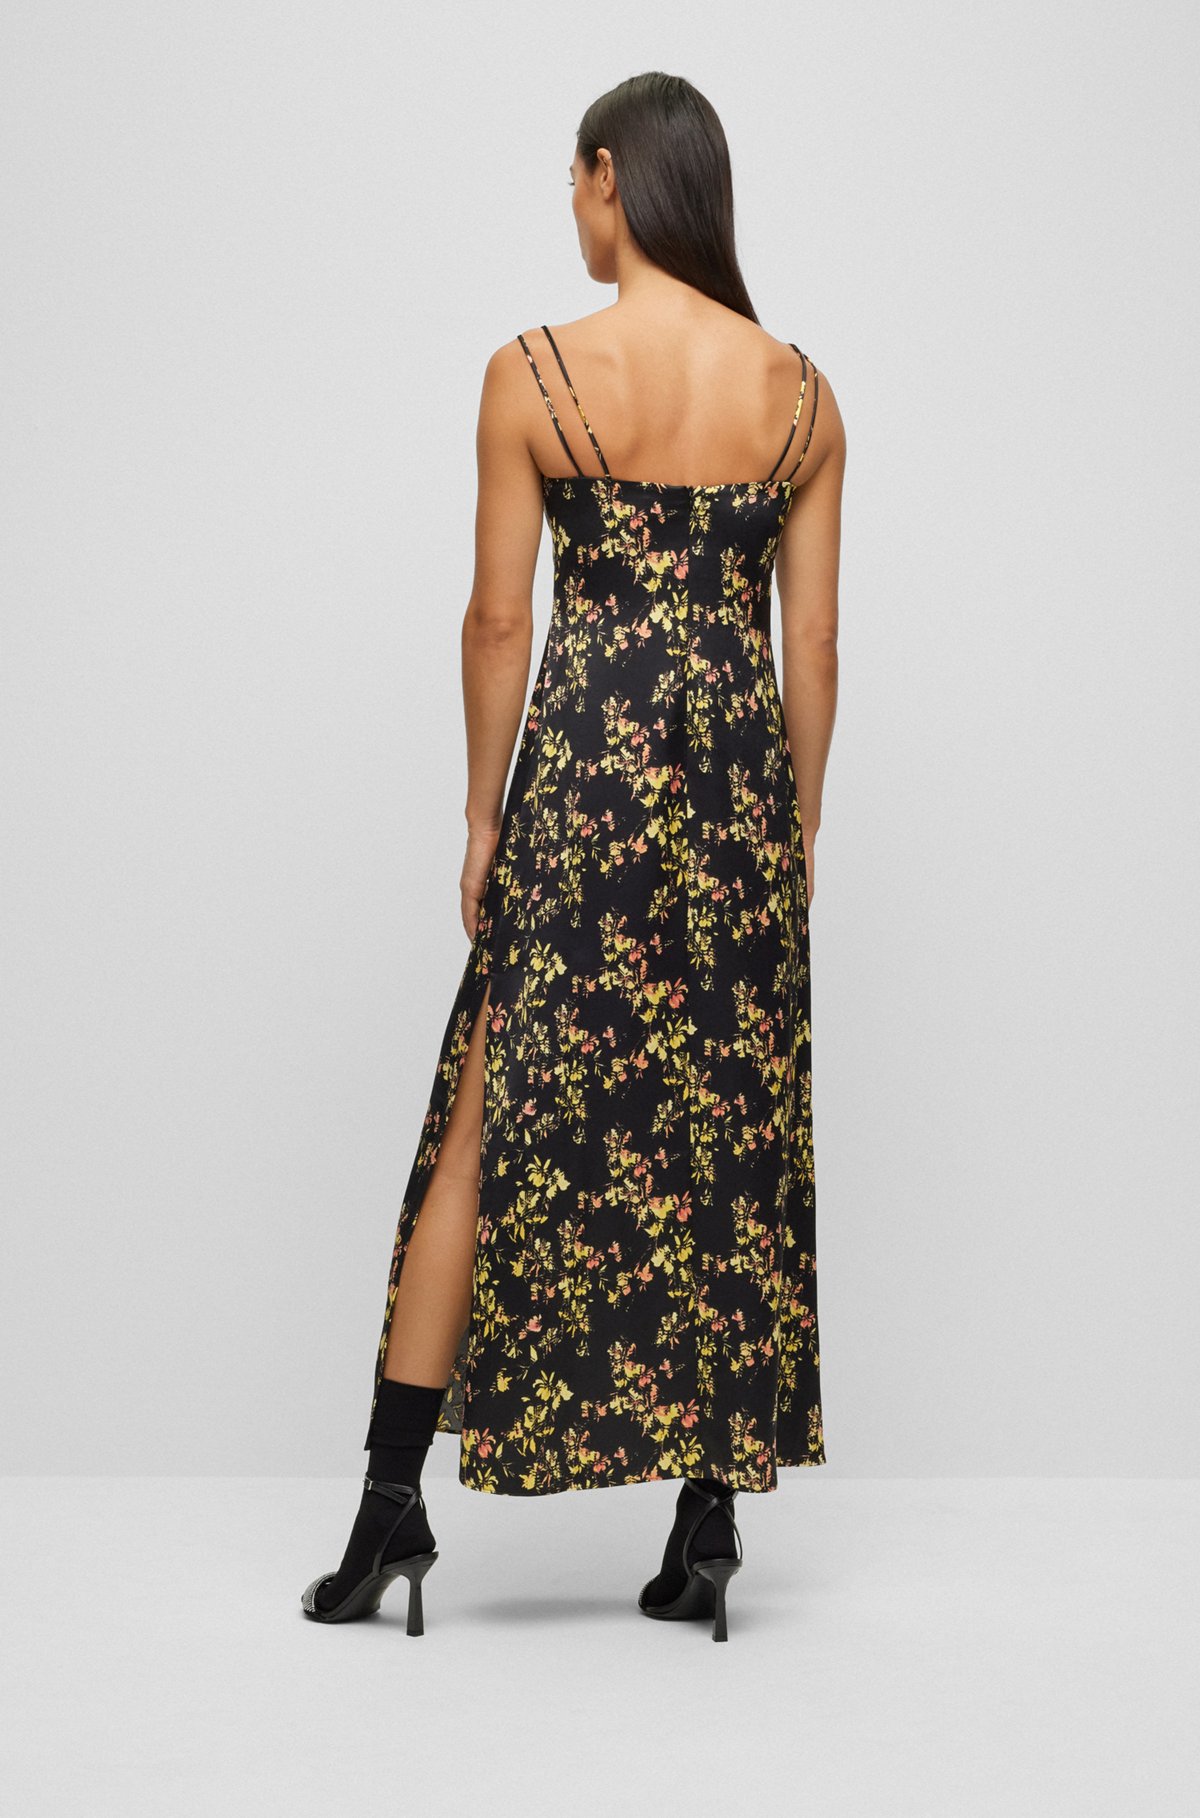 HUGO - Floral-print sleeveless dress with lace detail